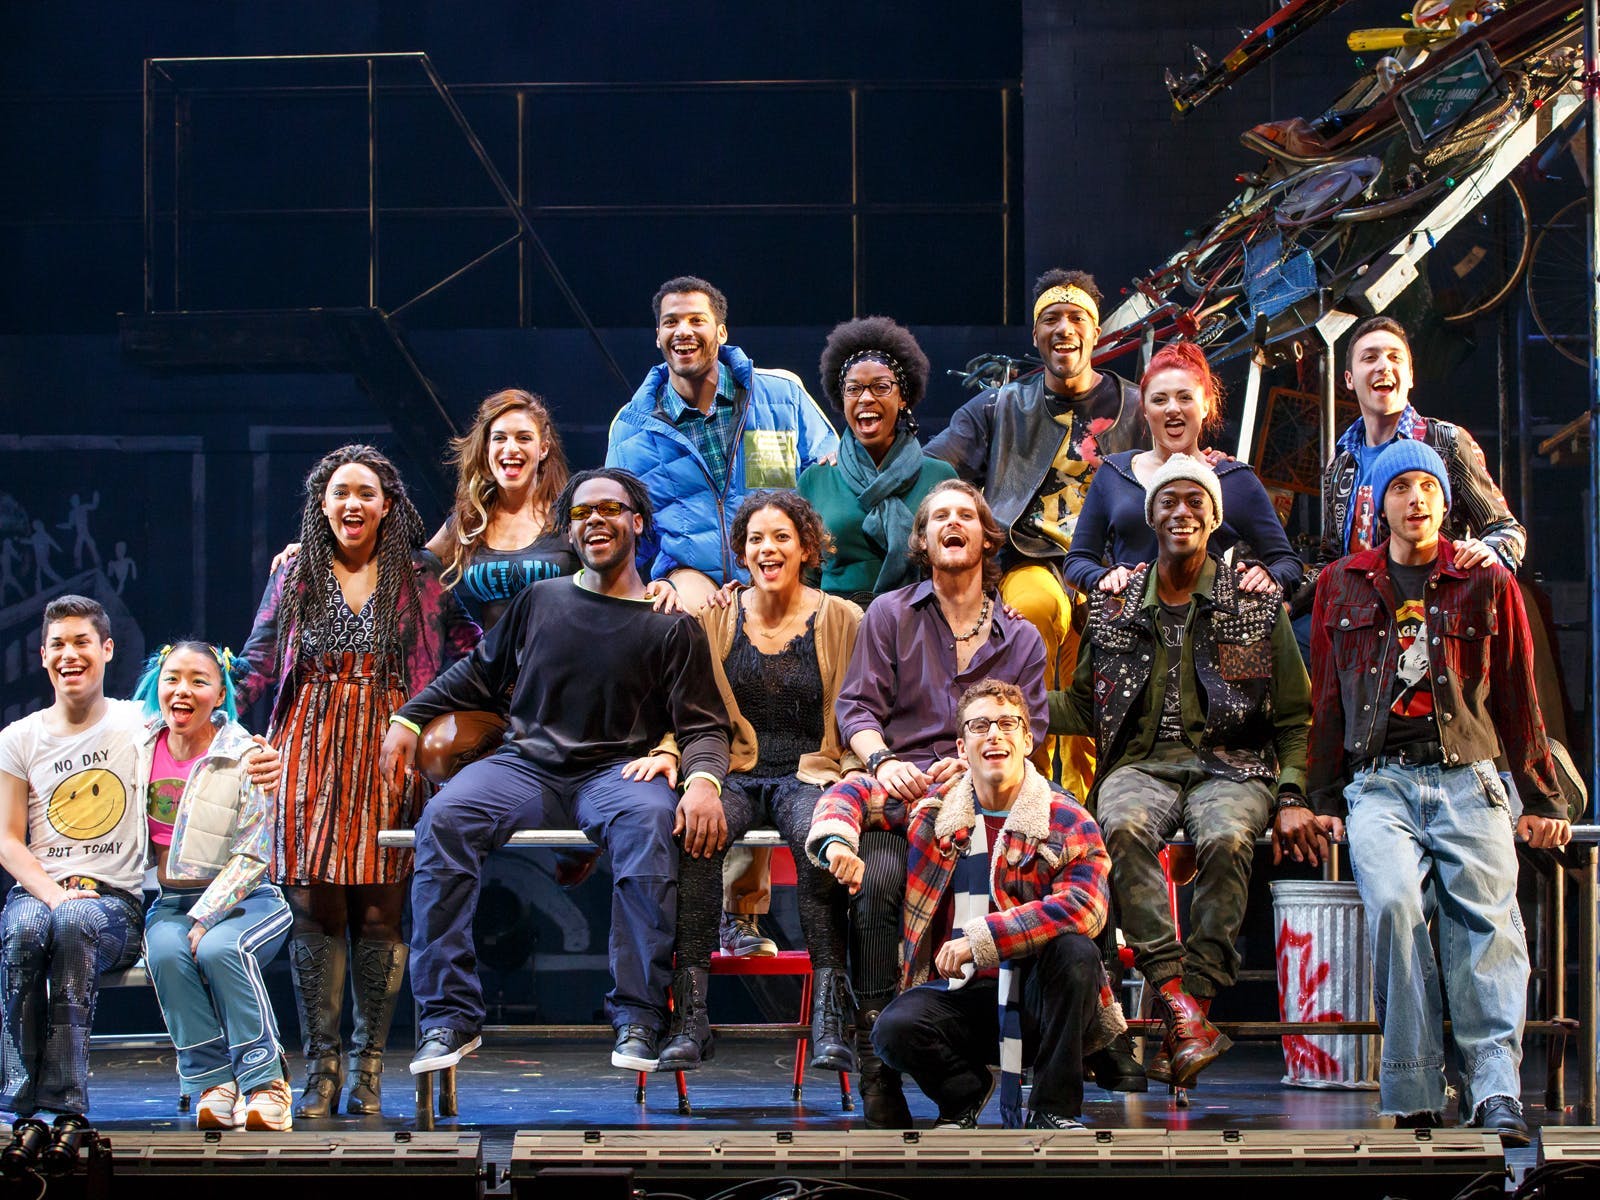 RENT: The 20th Anniversary Tour Tickets